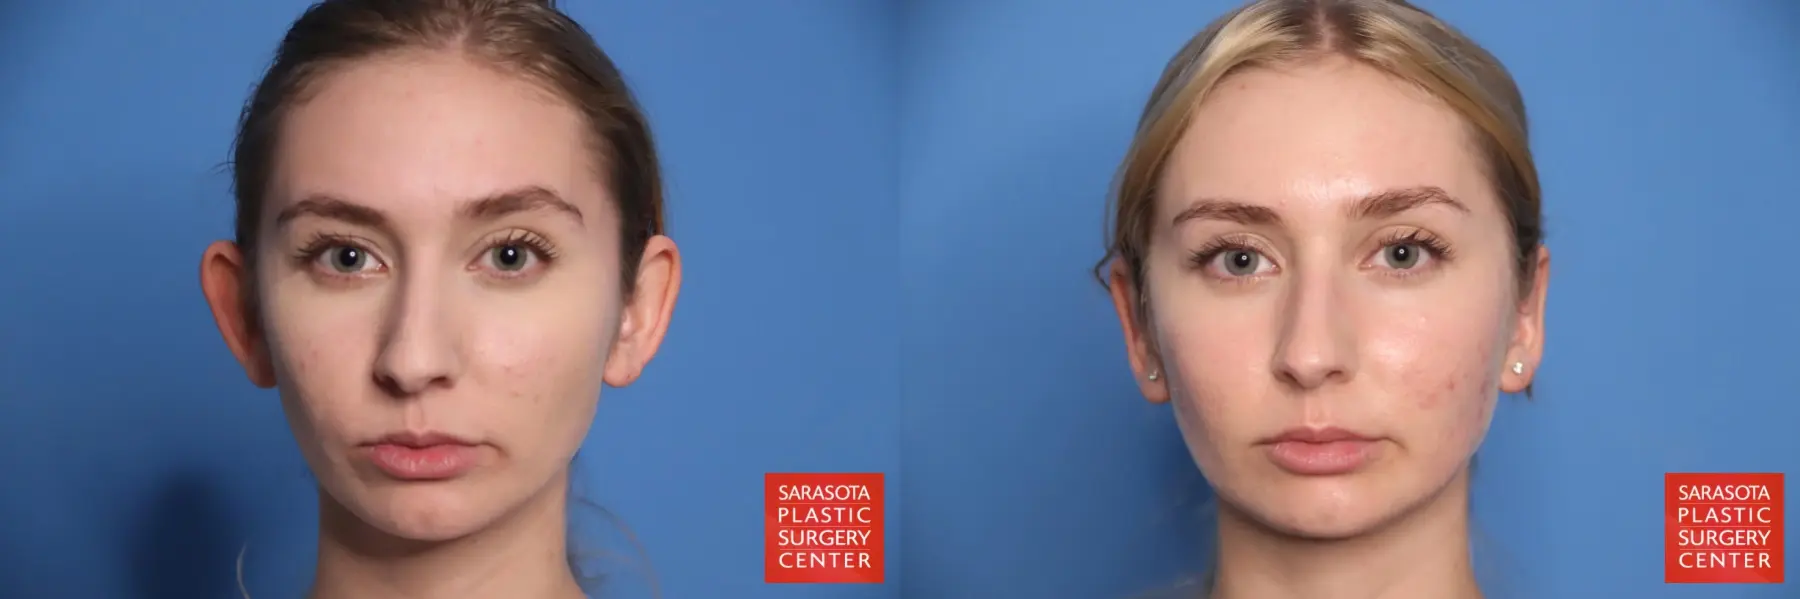 Otoplasty And Earlobe Repair: Patient 3 - Before and After  